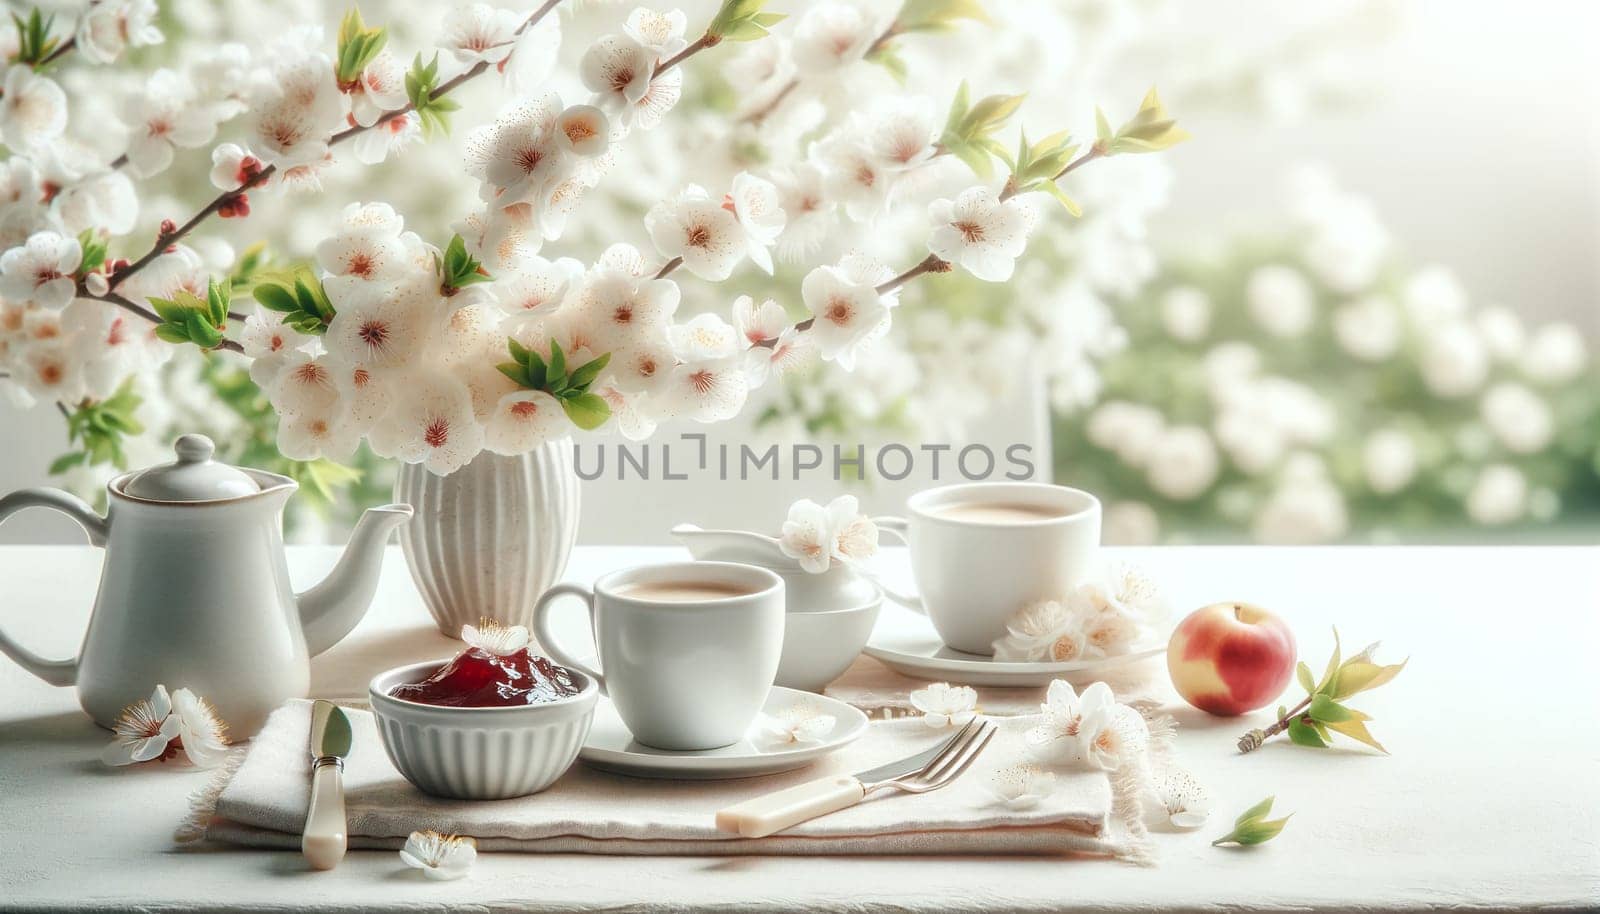 two cups of tea, a teapot and a bowl of berry jelly on a white table in the garden under flowering white branches by Annado